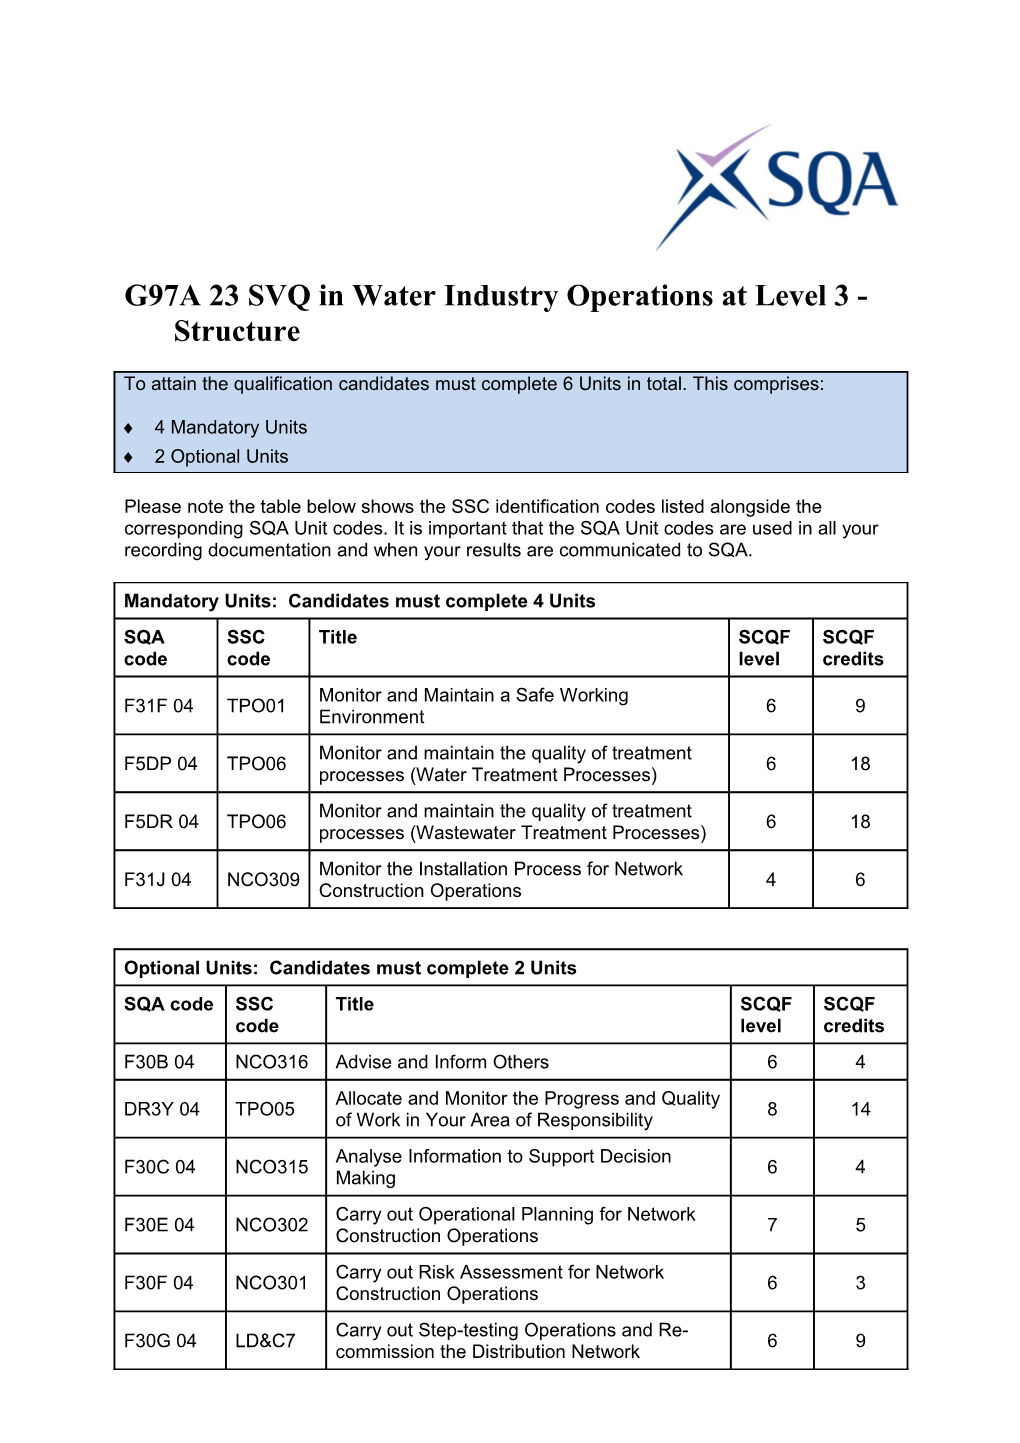 G97A23 SVQ in Water Industry Operationsat Level 3 - Structure